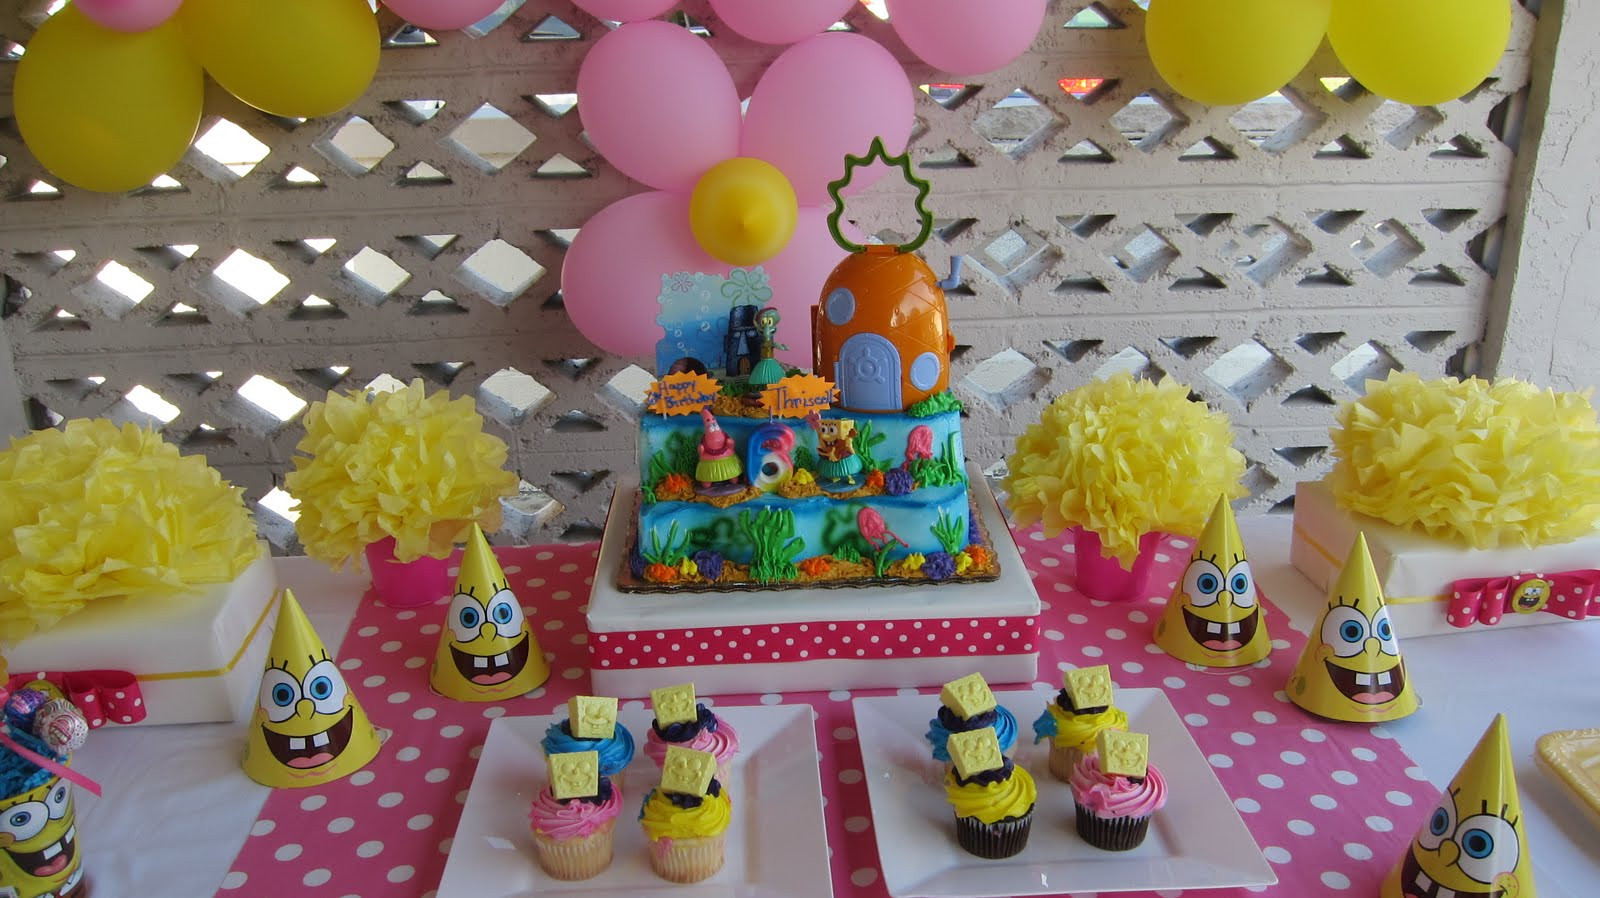 Spongebob Birthday Decorations
 SimplyIced Party Details Pink and Yellow SpongeBob Party